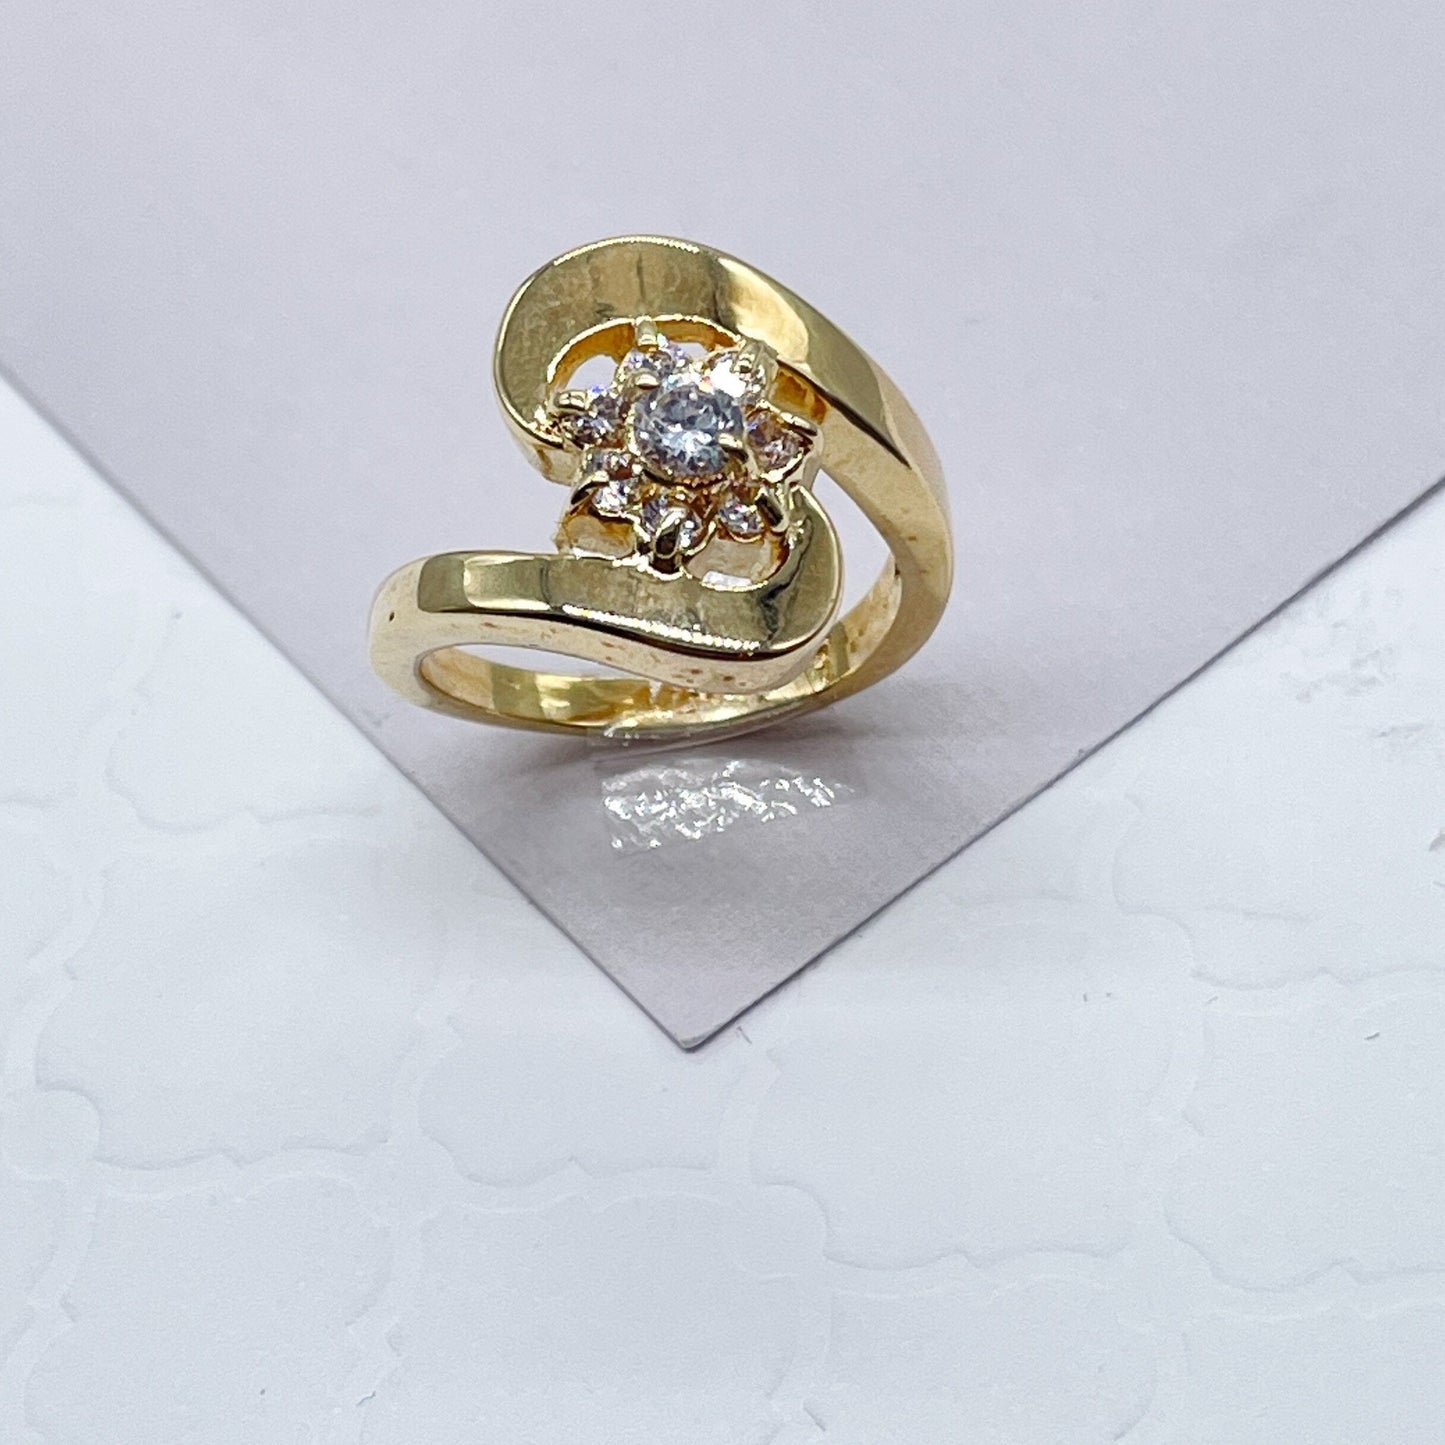 18k Gold Layered Flower Ring With Cubic Zirconia Stones Surrounded With Gold